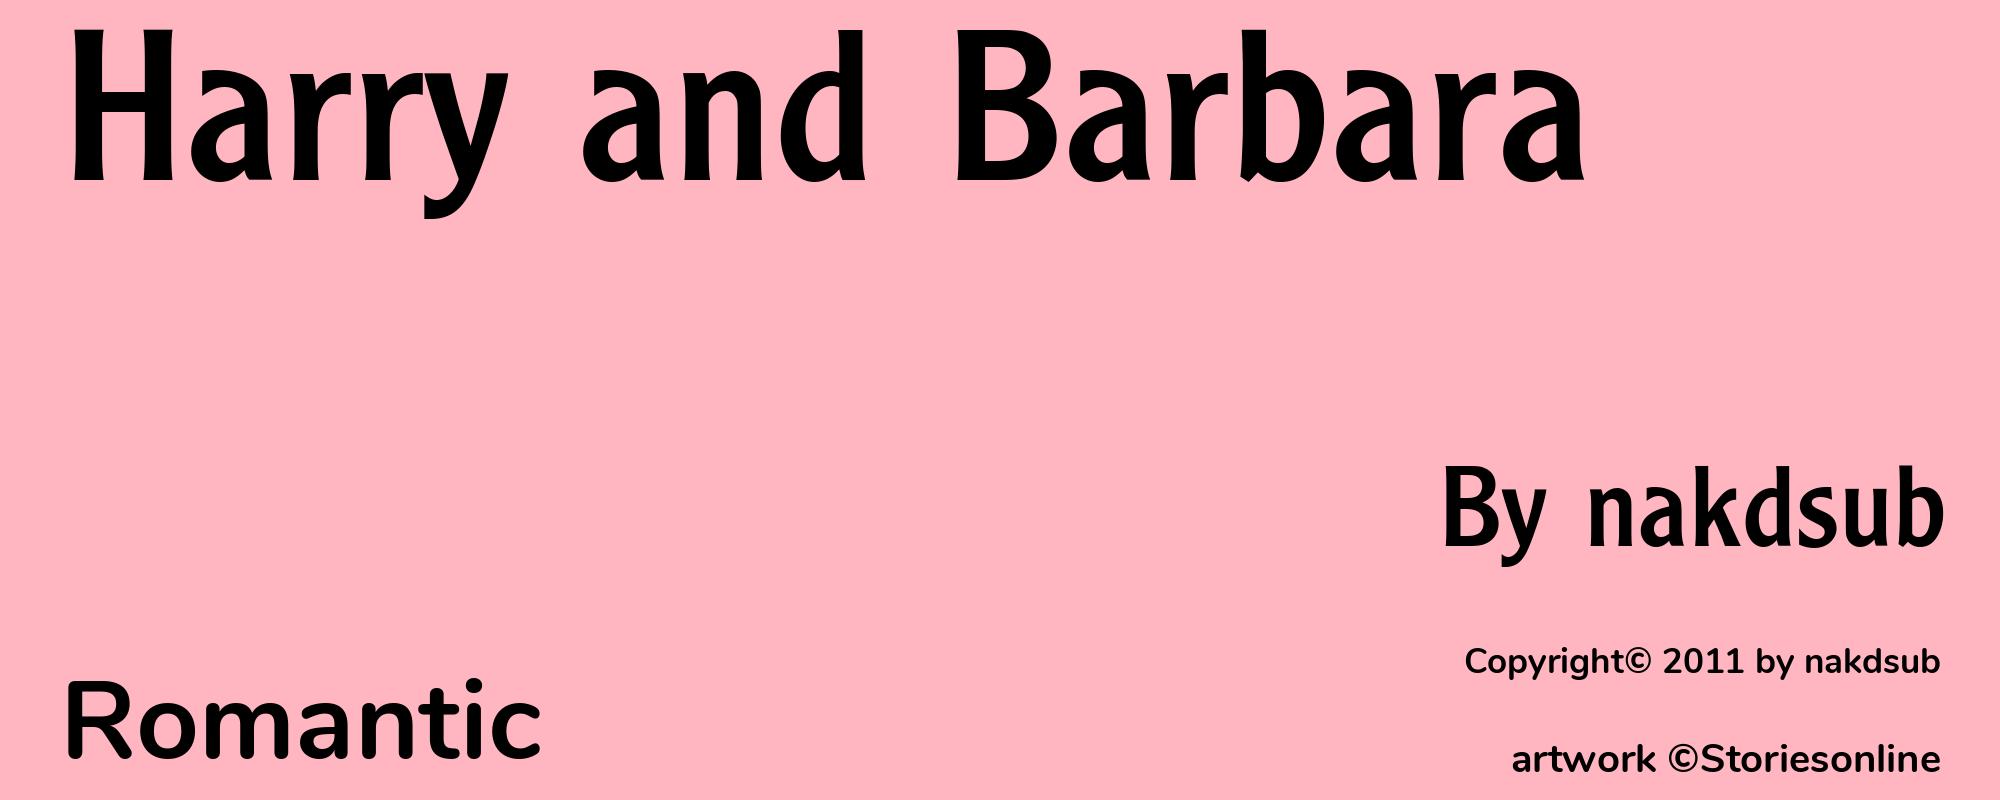 Harry and Barbara - Cover